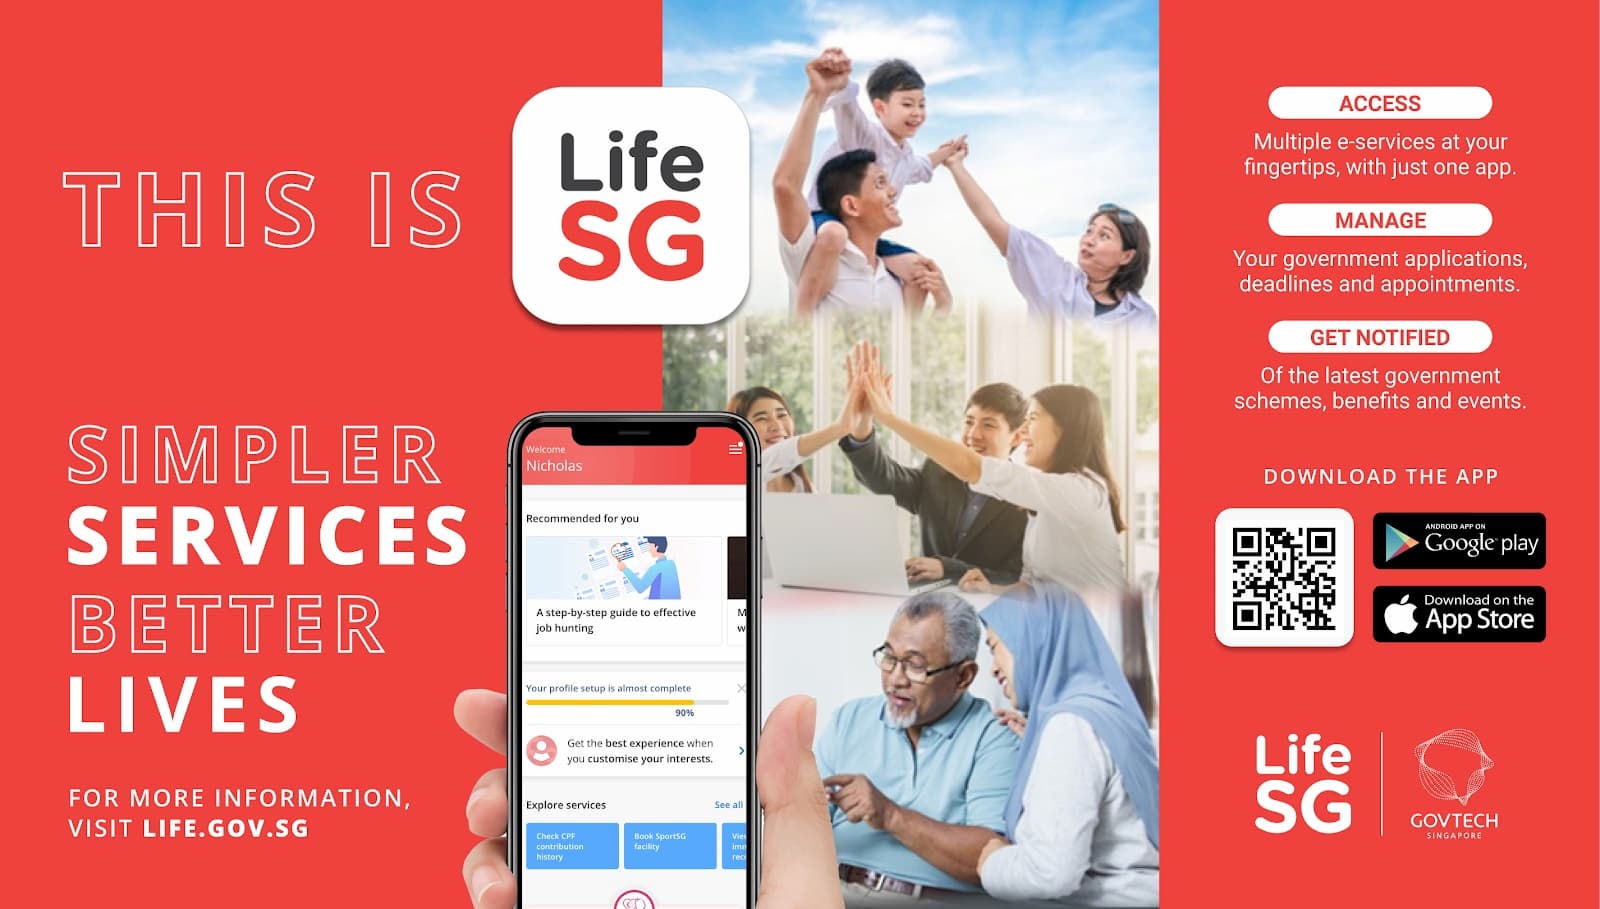 Access multiple e-services via the LifeSG app and make life simpler with LifeSG